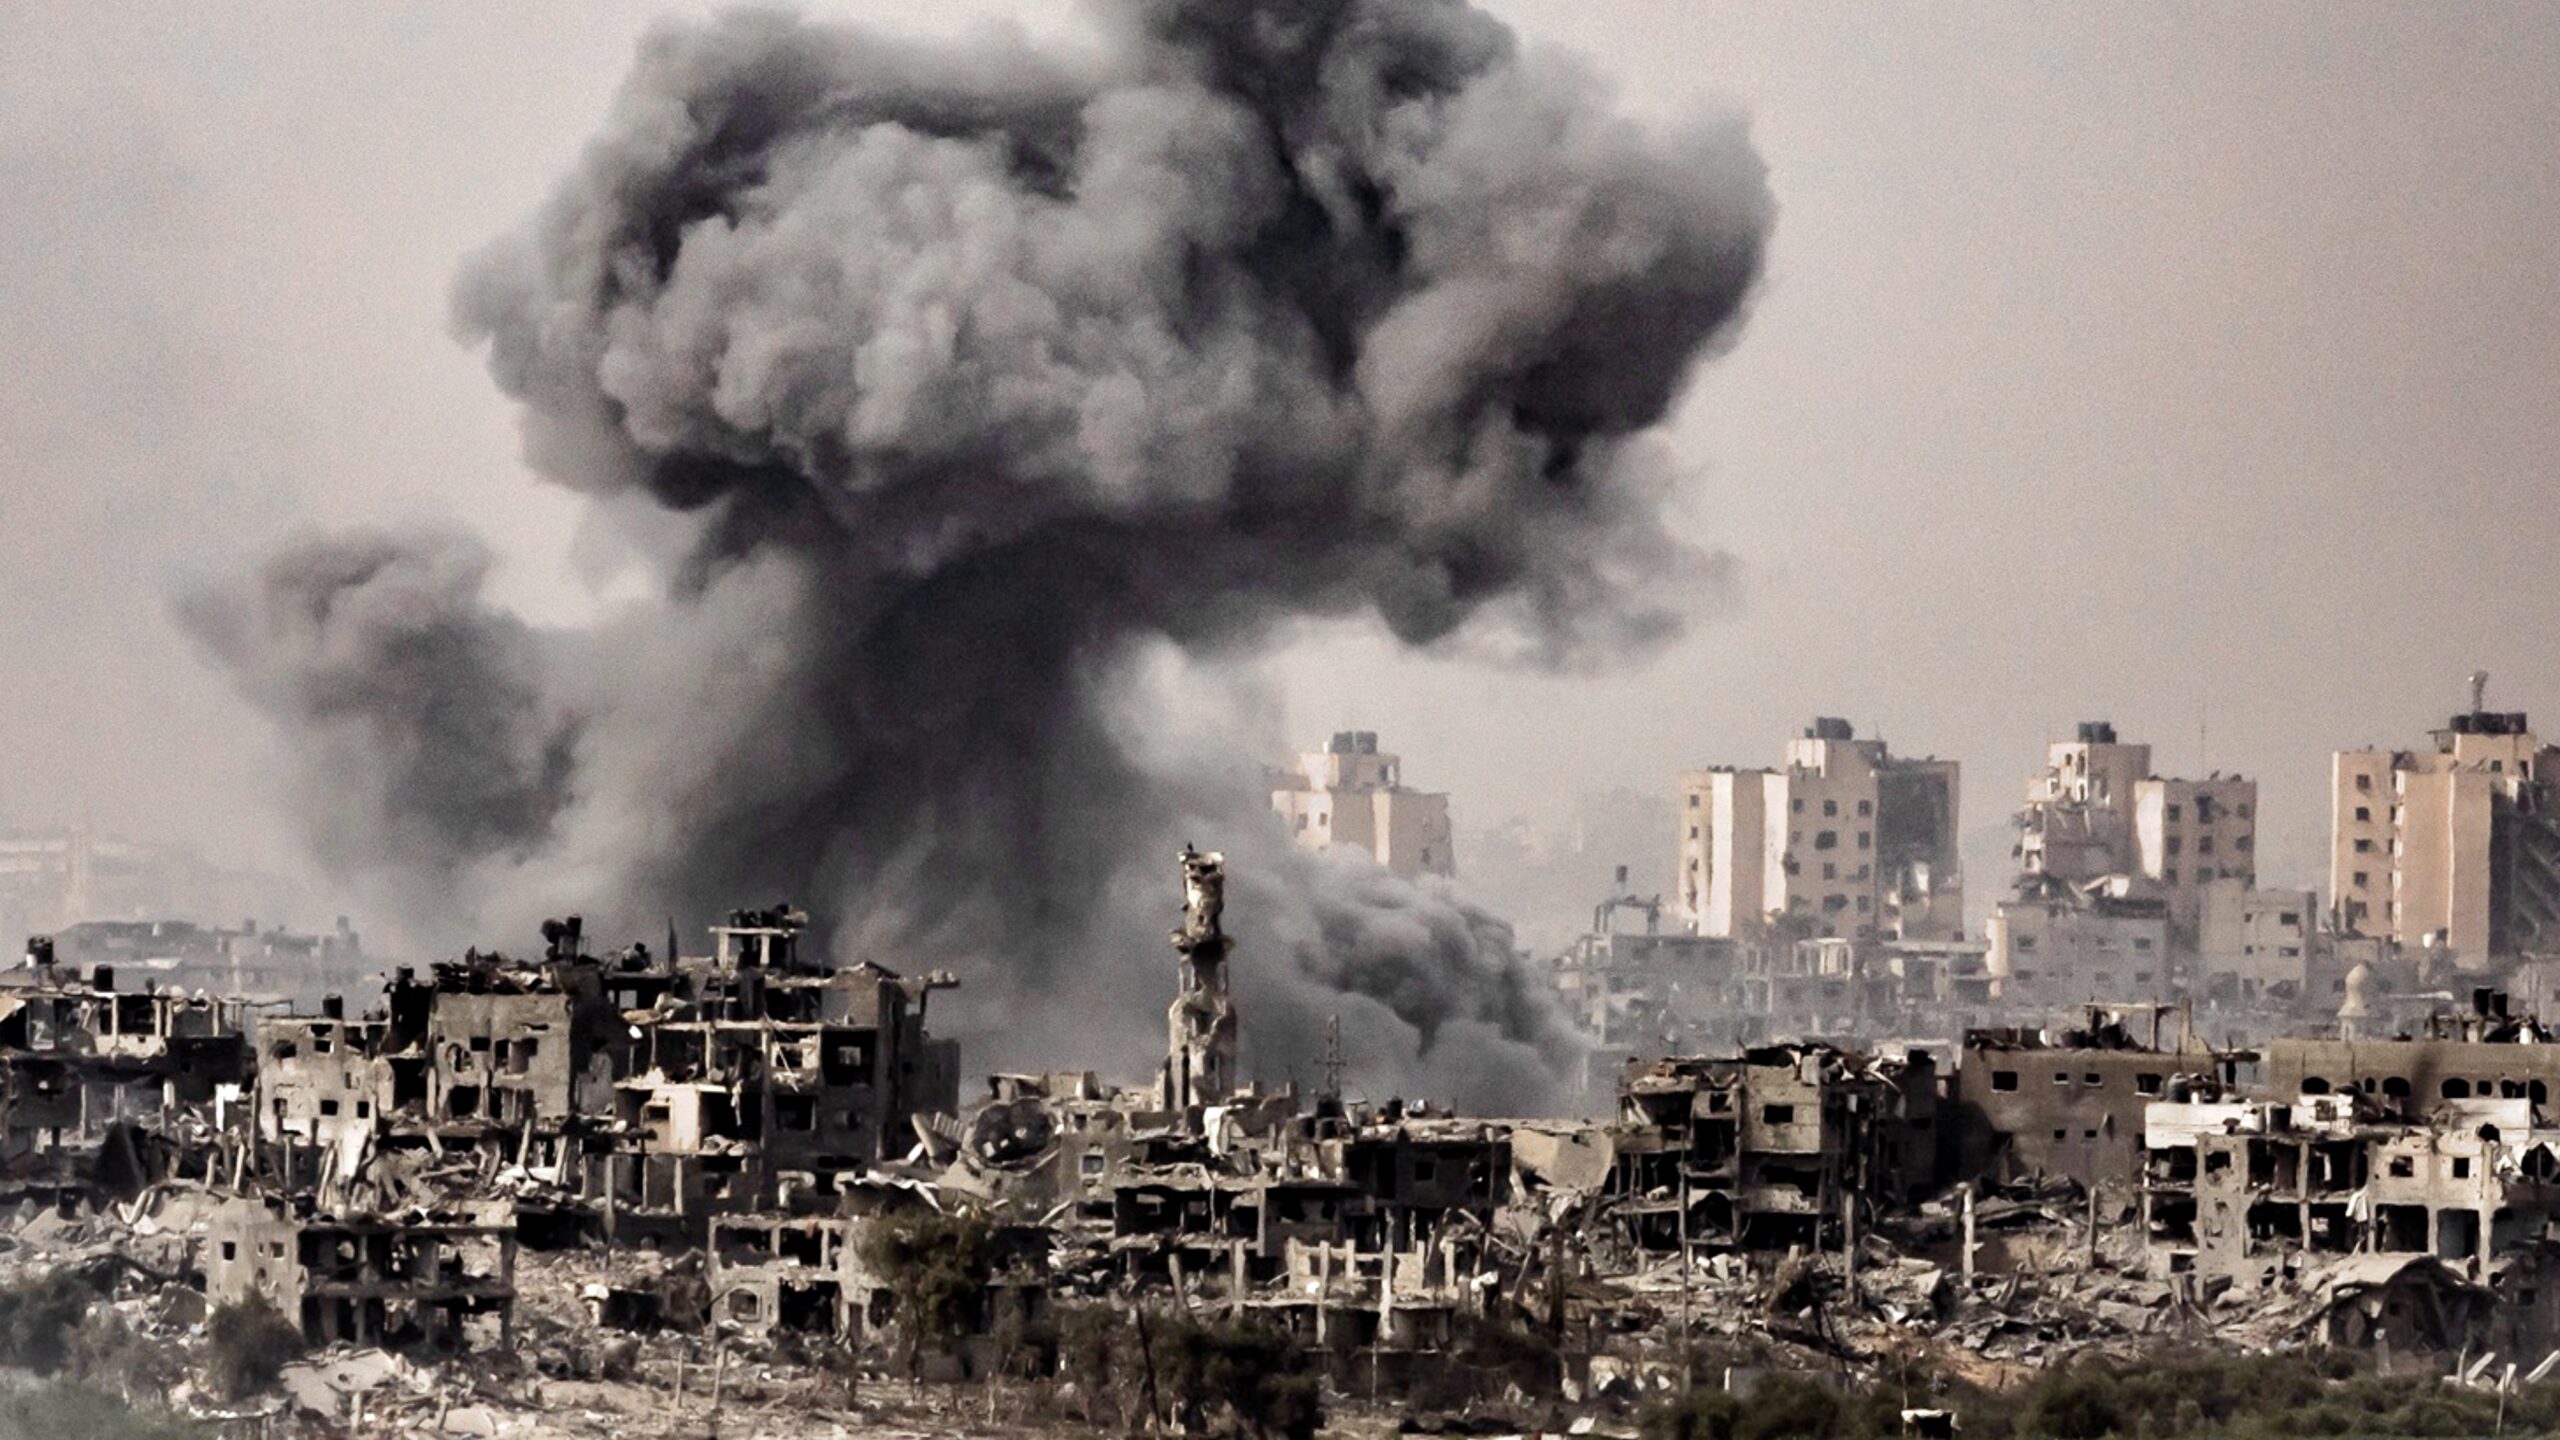 Amir Tsarfati: World War Conflicts — Taking Stock Of Our Global Situation - Harbingers Daily